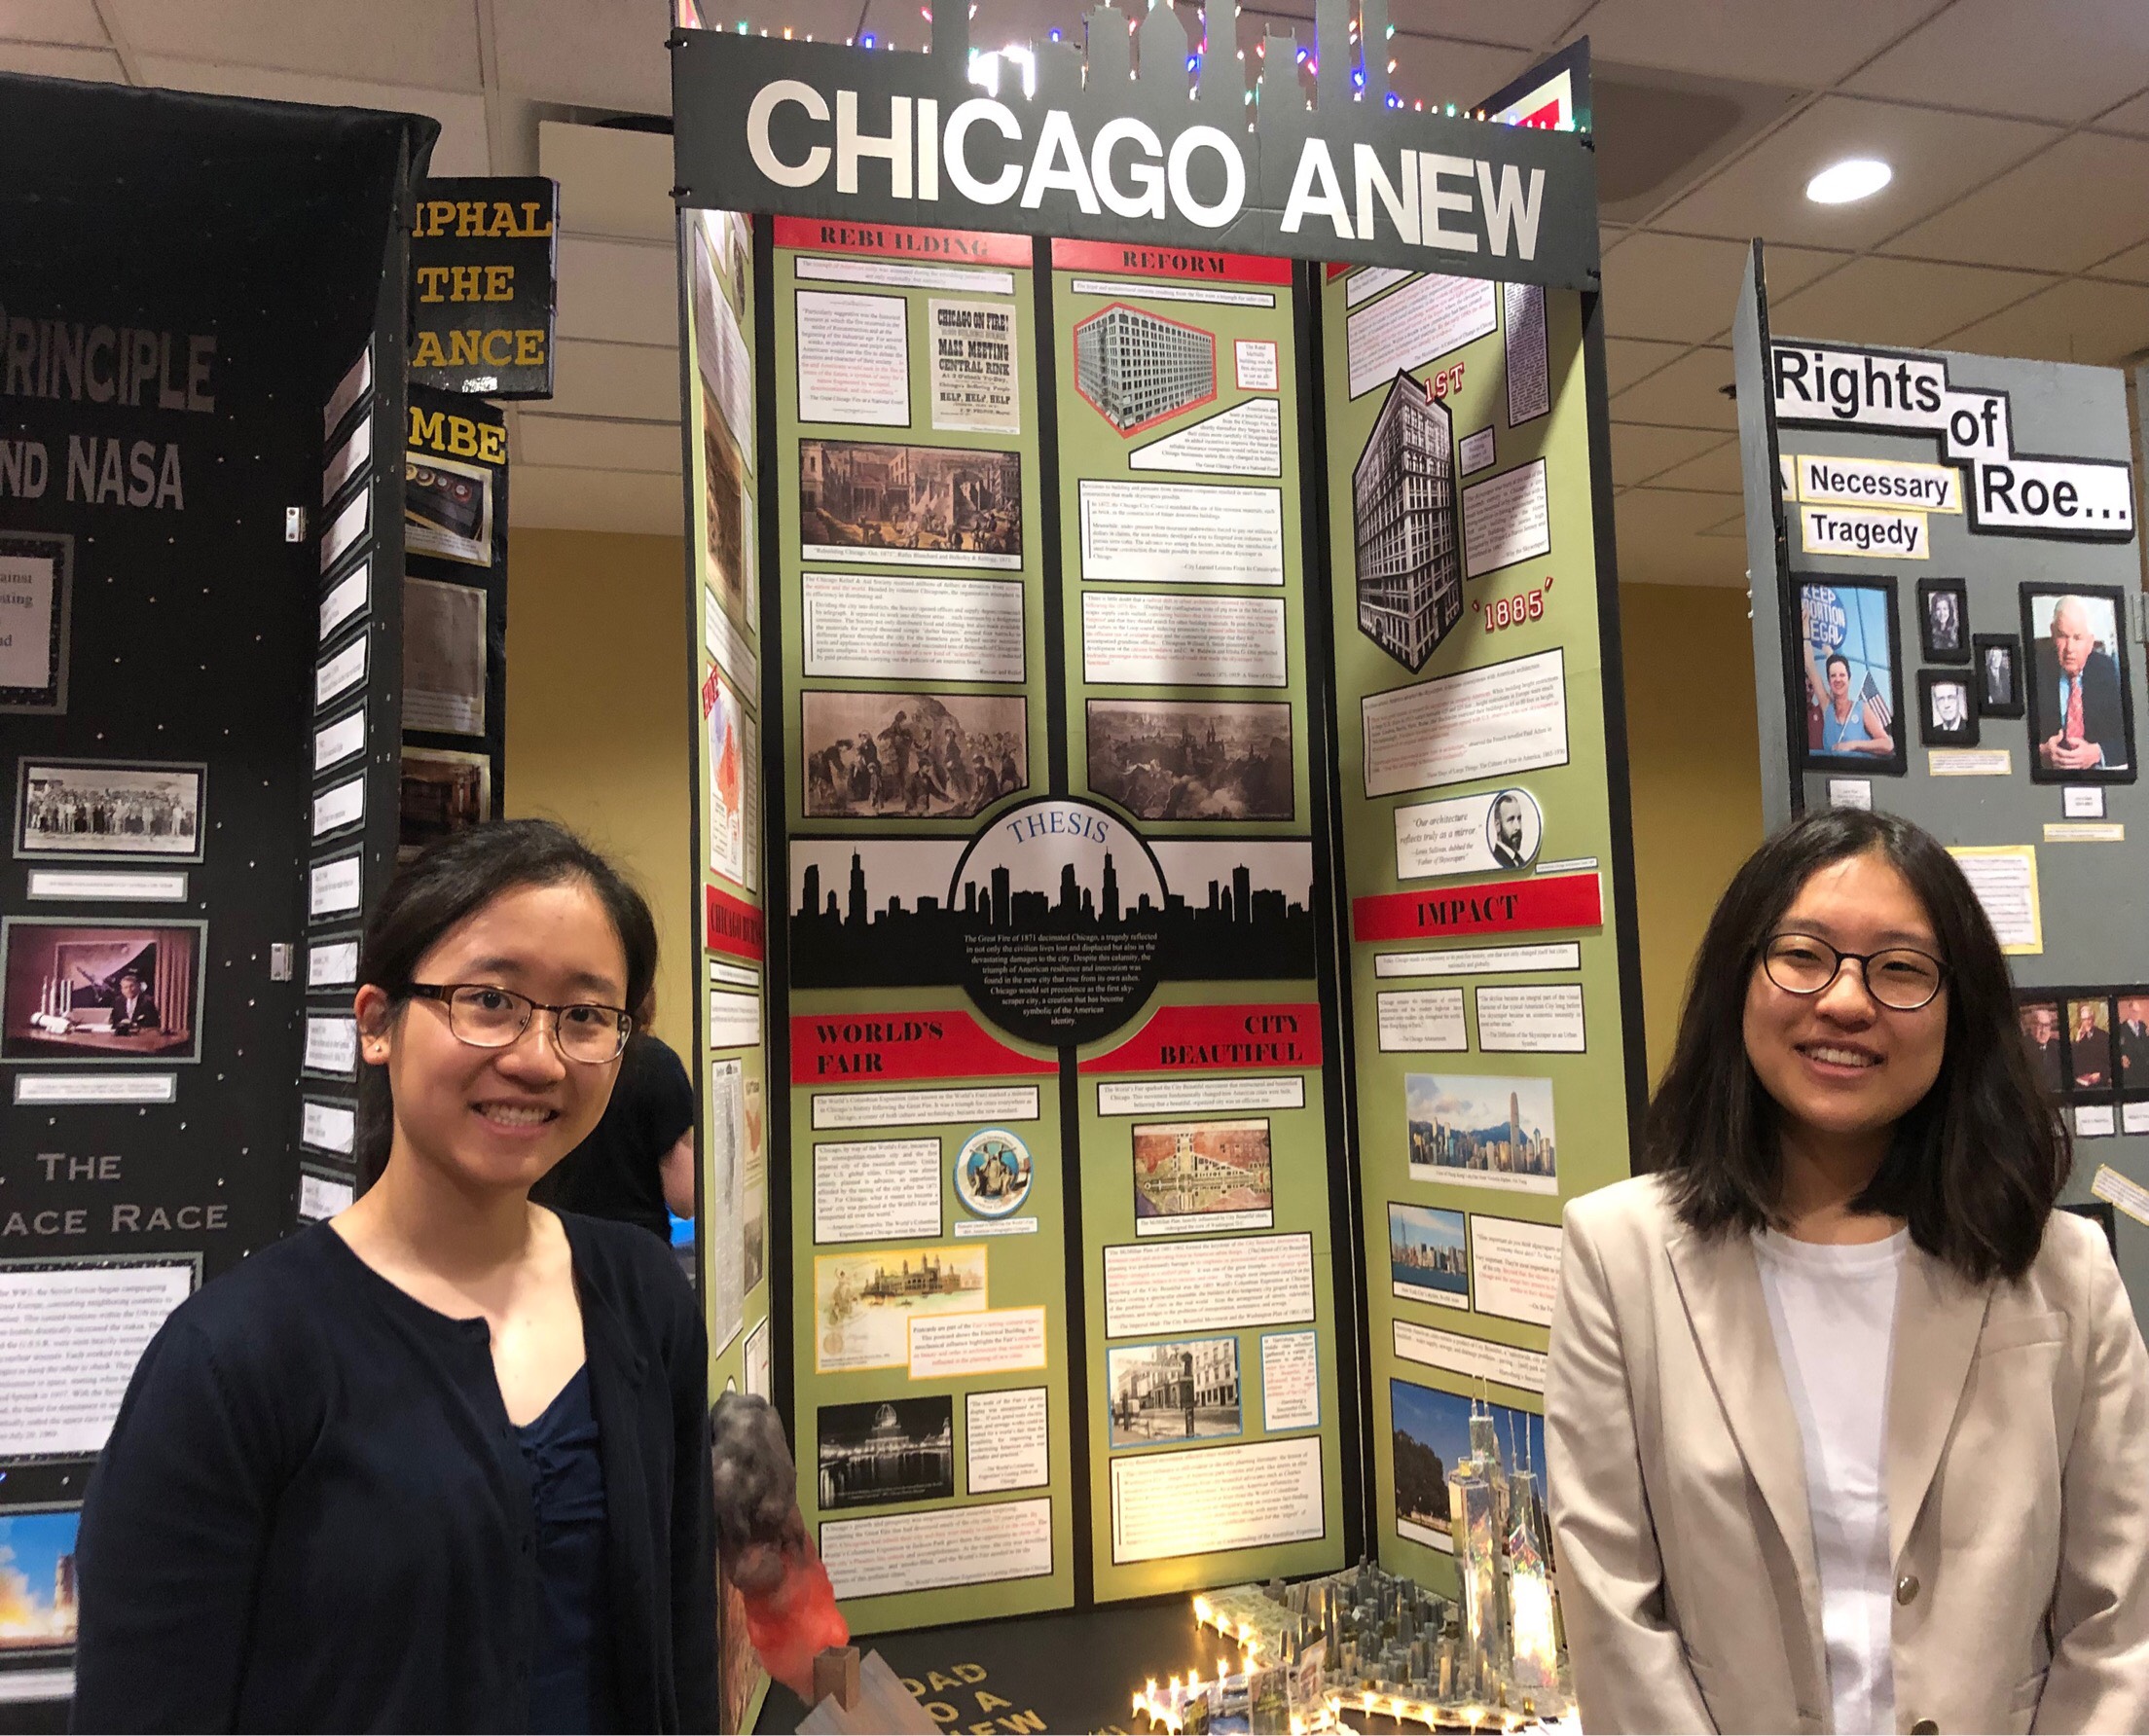 Christy Guan and Hana Kim from Stuyvesant High School, New York, NY with their 1st place project: "Tragedy of the Great Fire and Triumph of Skyscraper City."